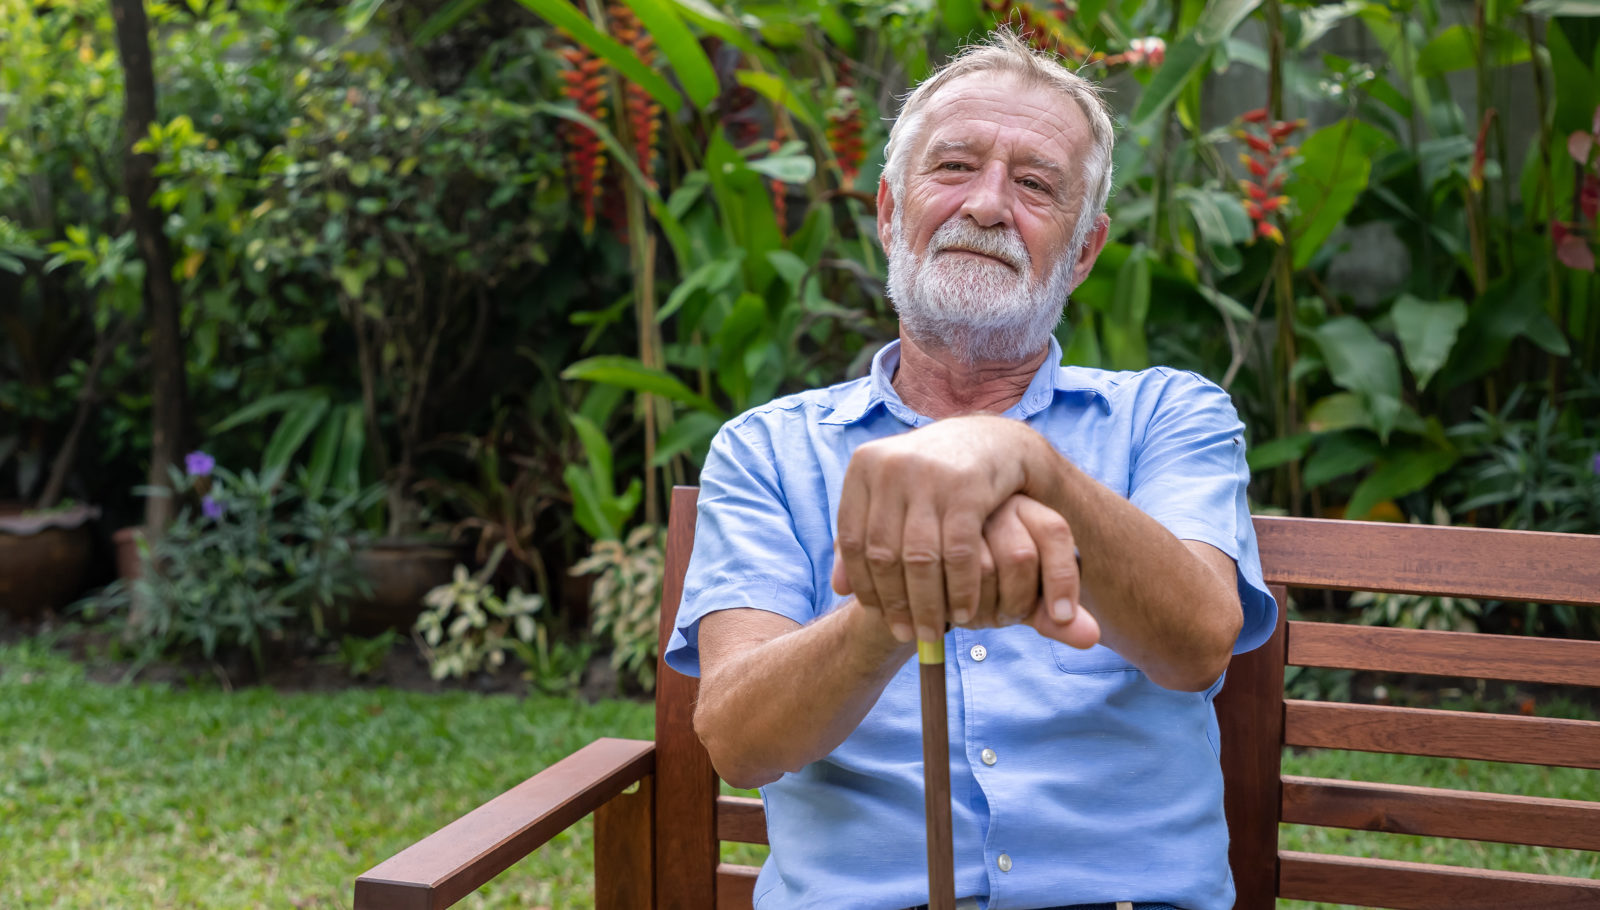 Thoughtful older man holding cane sitting on bench in garden